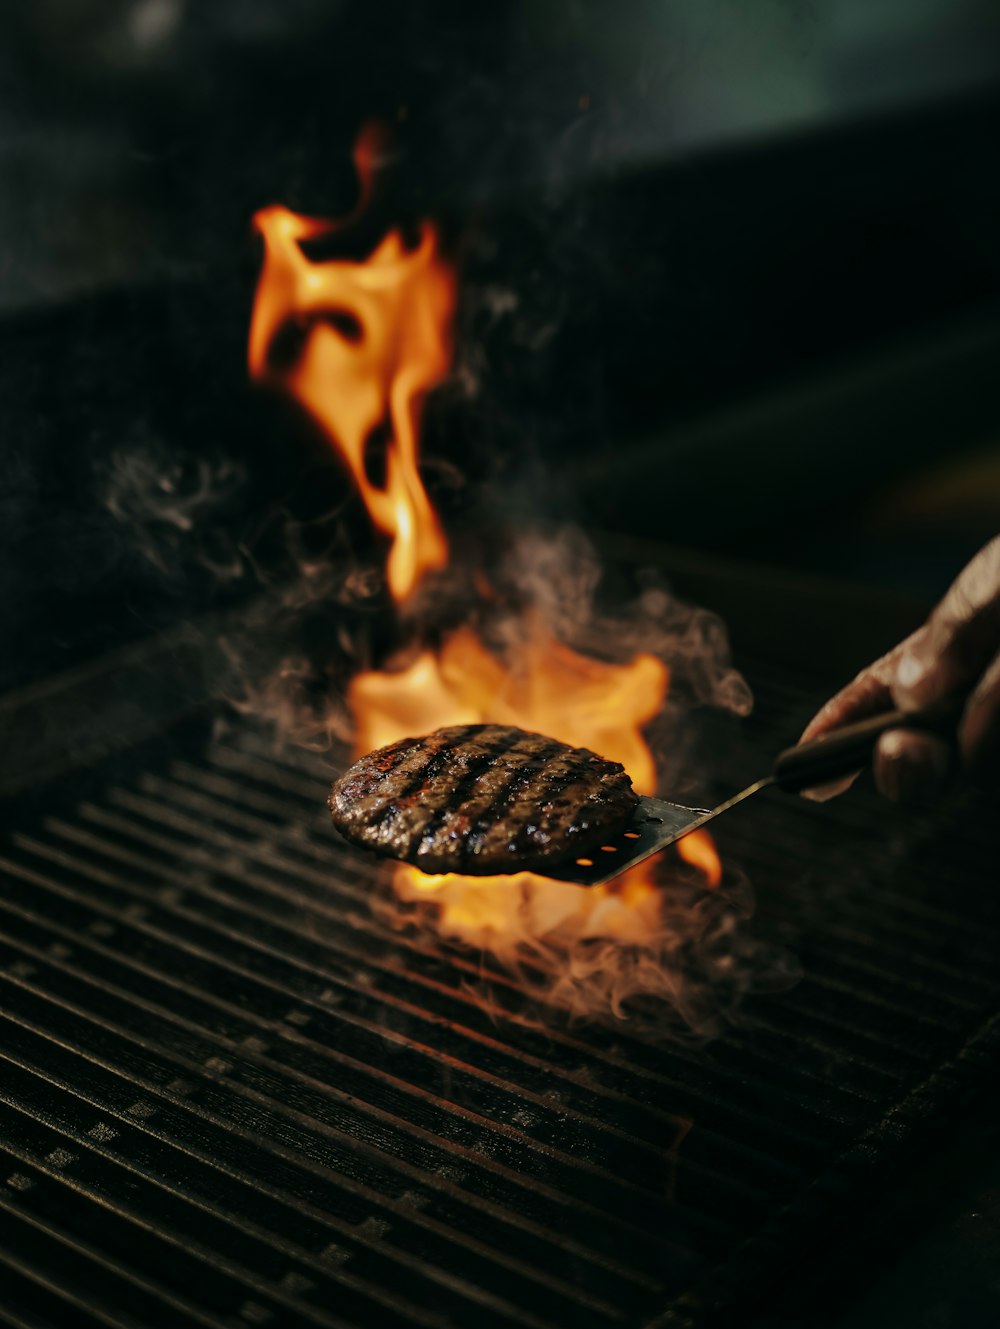 a person is grilling a hamburger on a grill